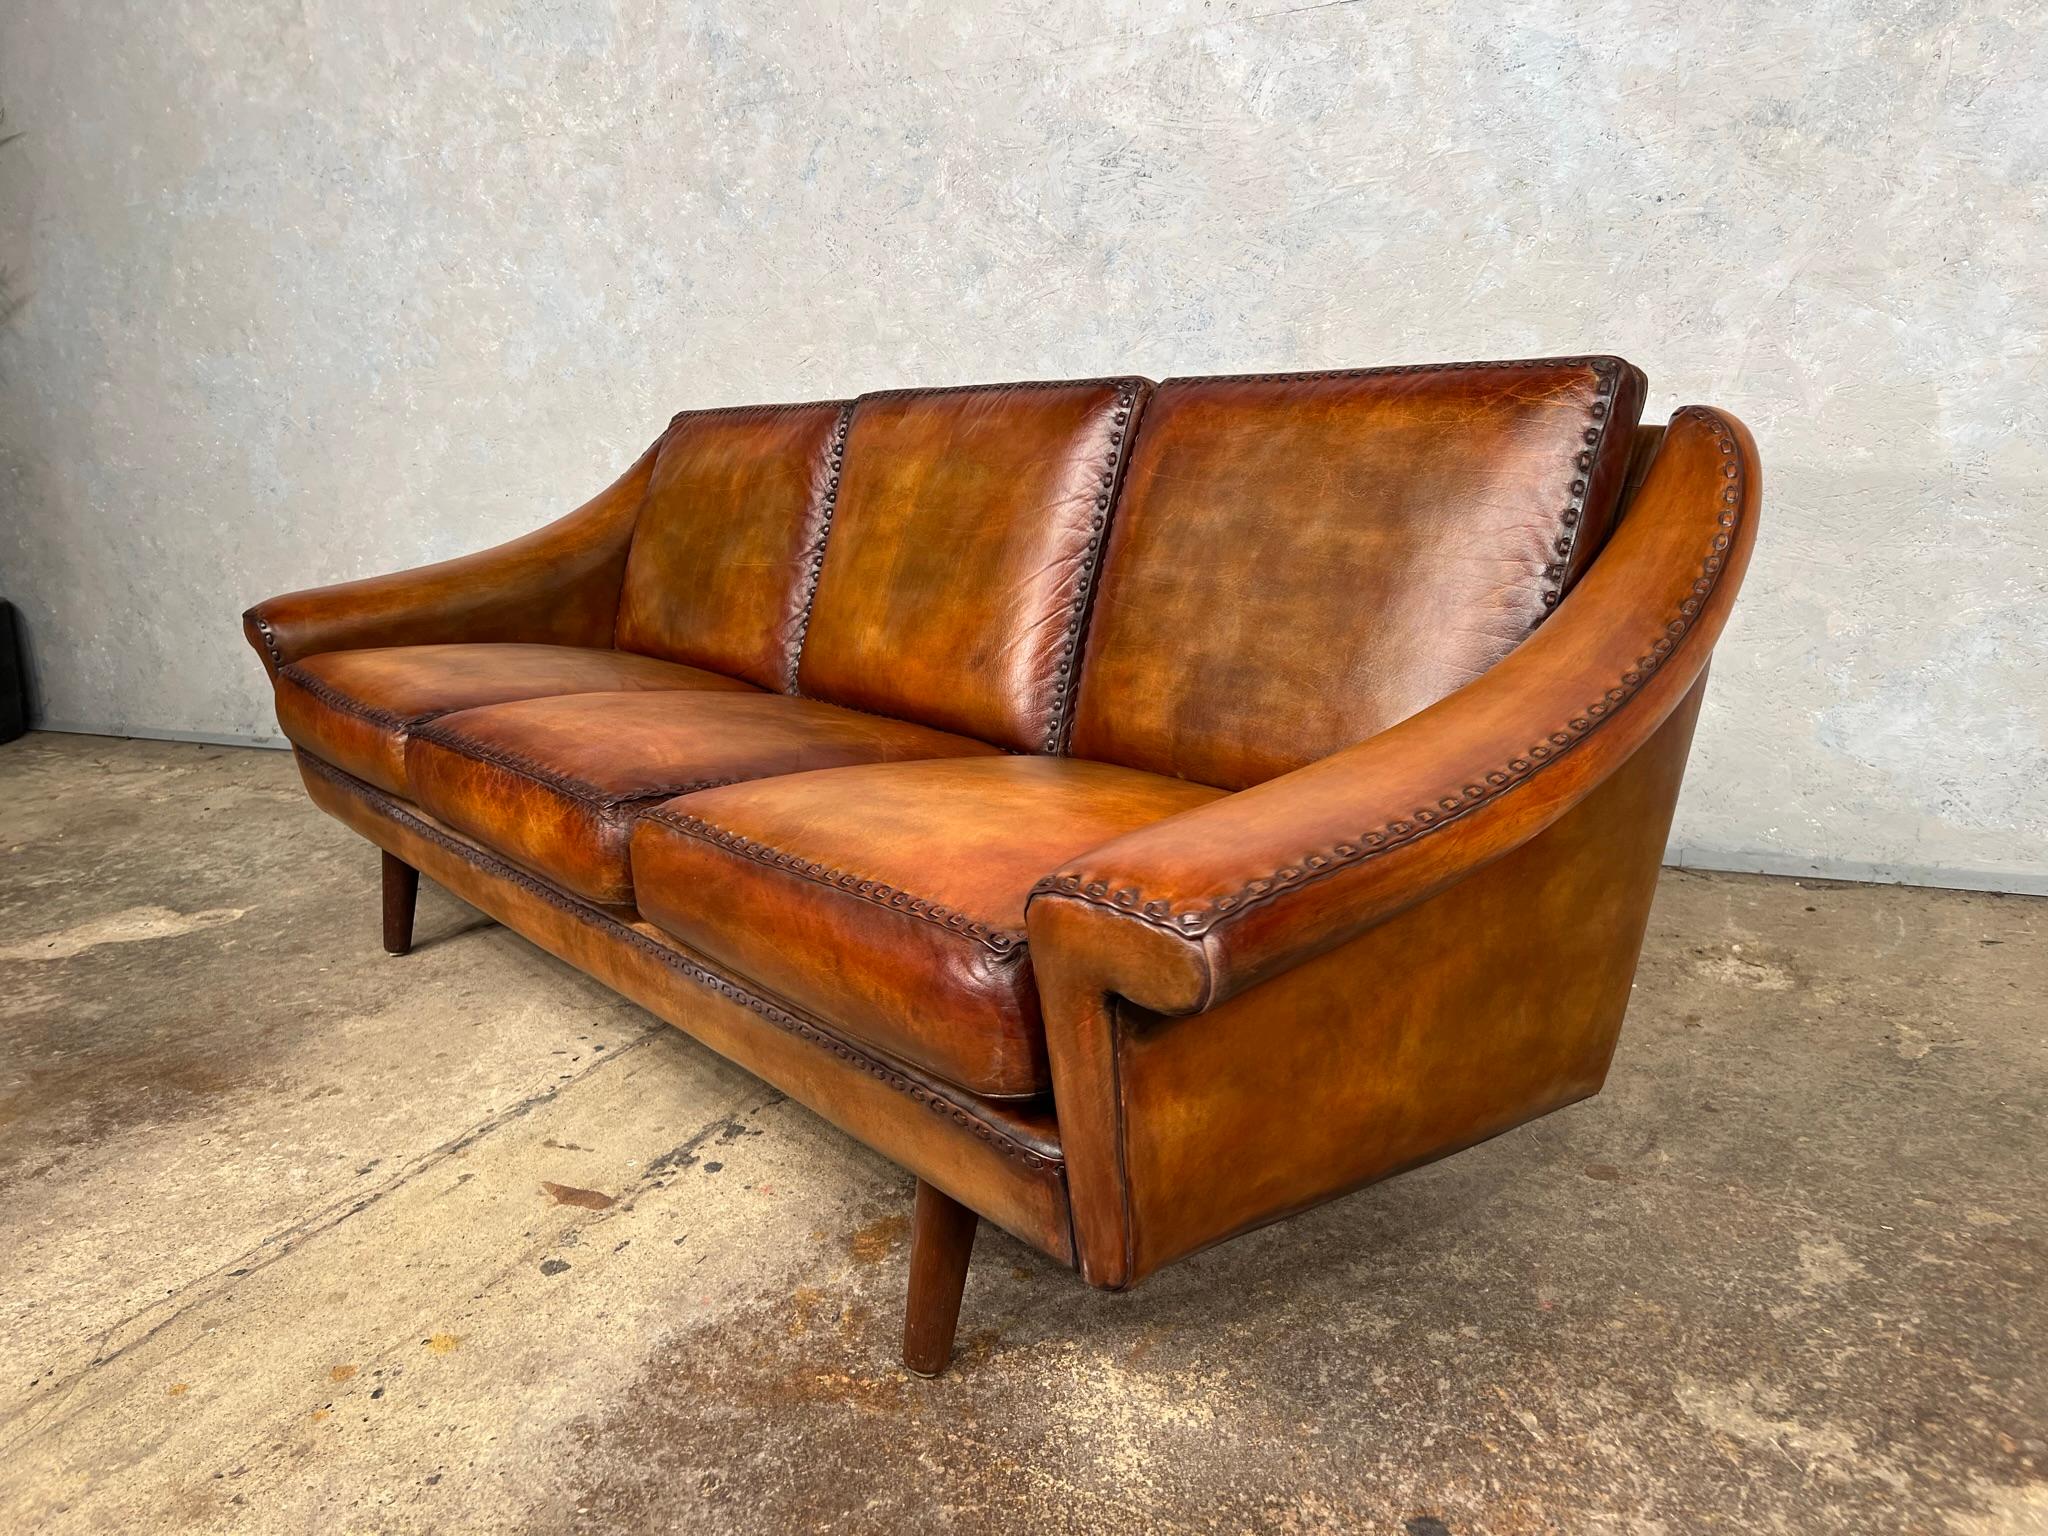 Matador Leather 3 Seater Sofa by Aage Christiansen for Eran 1960s #642 For Sale 1